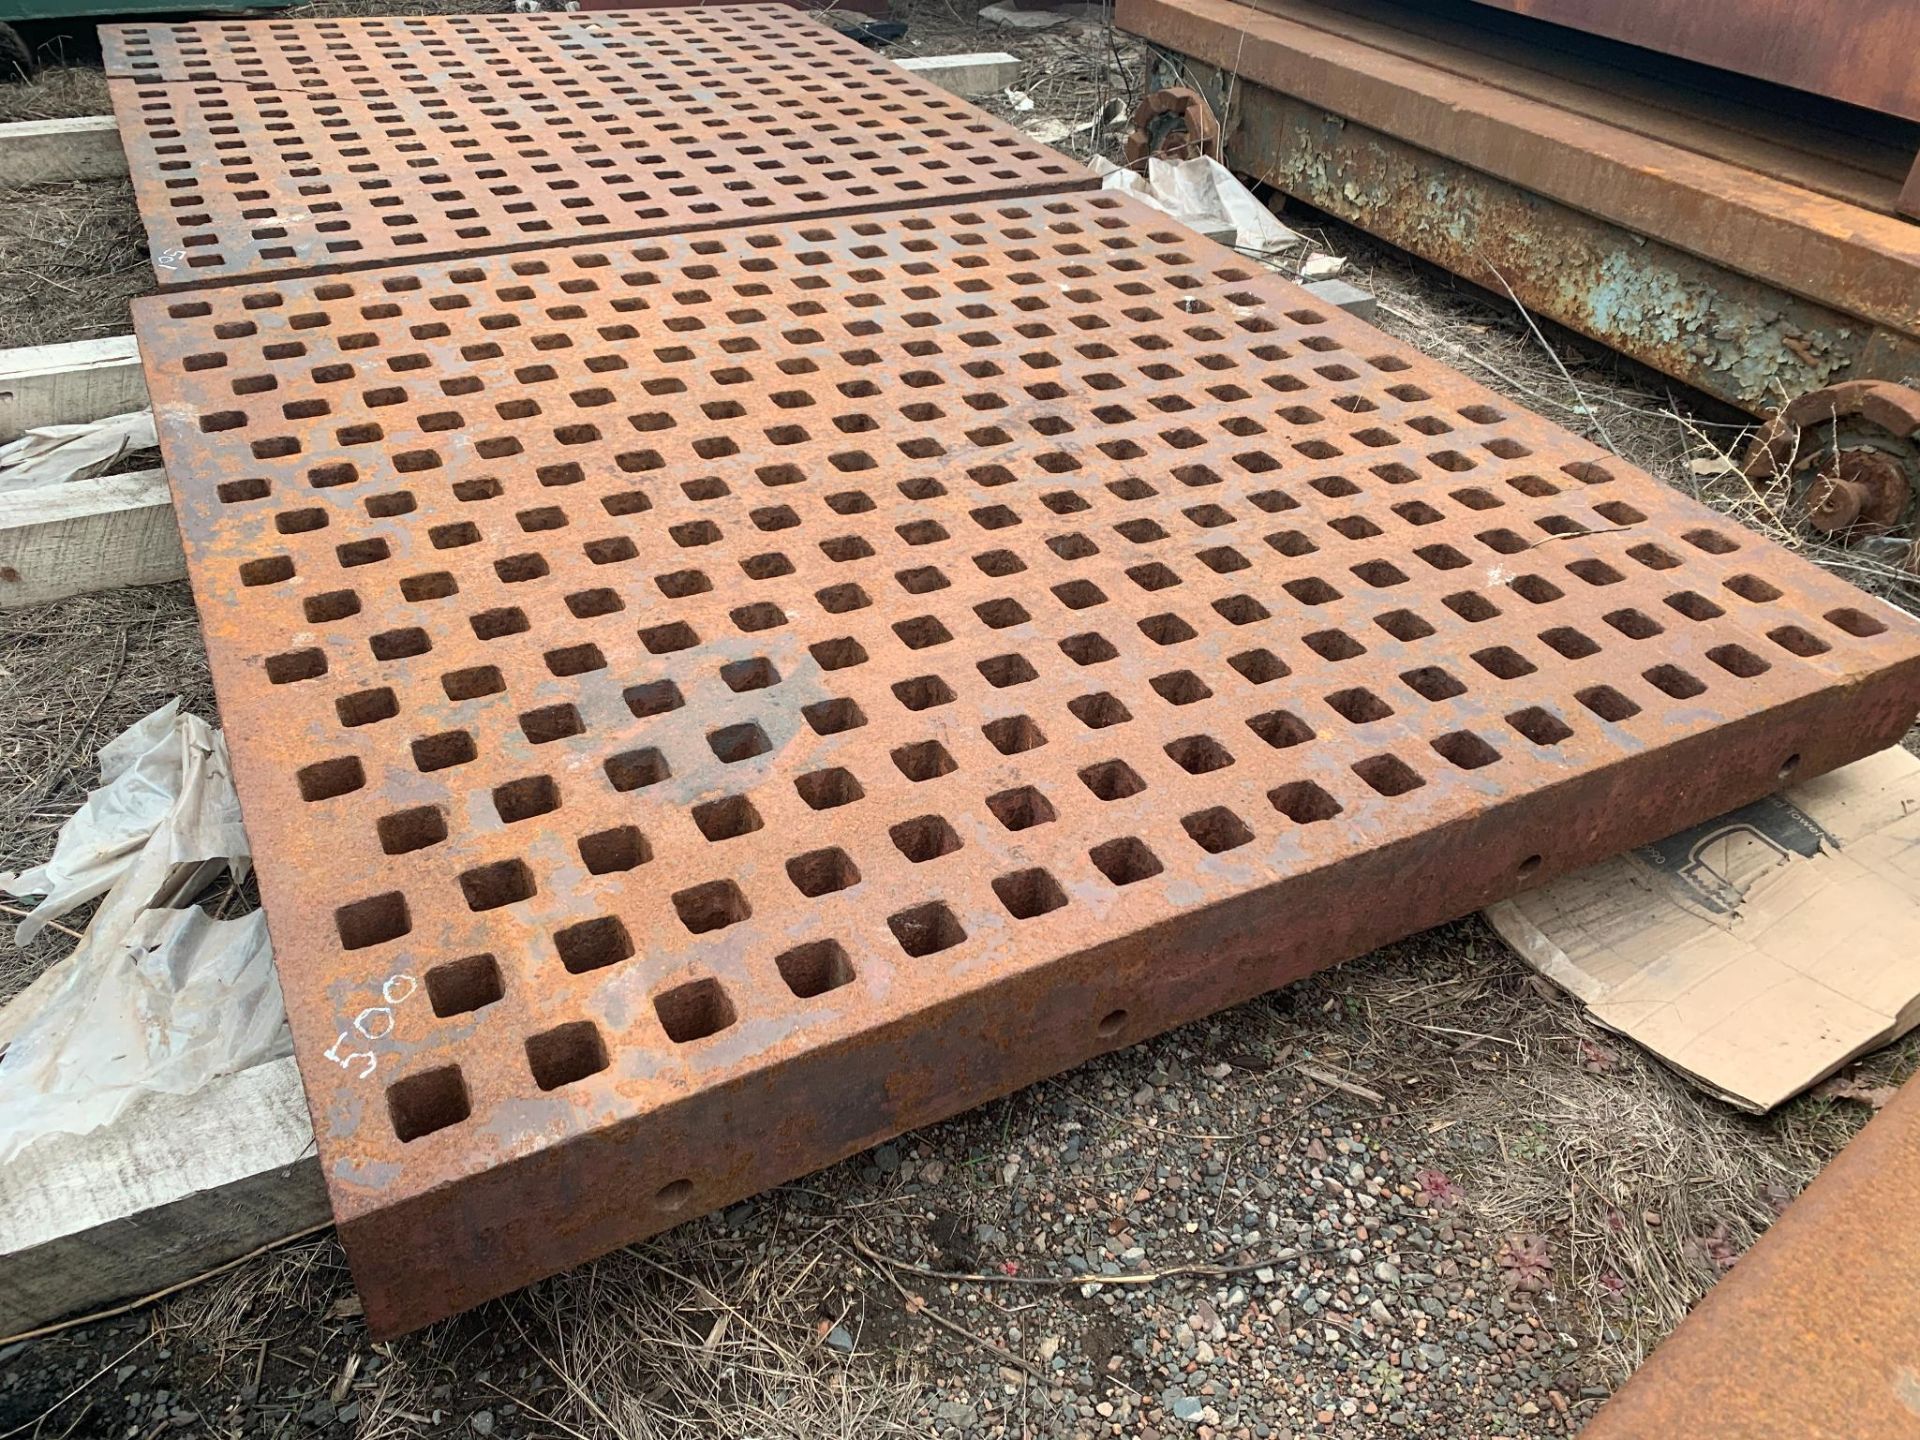 Acorn Style Welding Platen. Approx 61.5" x 61.5" x 5.25" deep with 2" square holes. Note: Small crac - Image 33 of 33